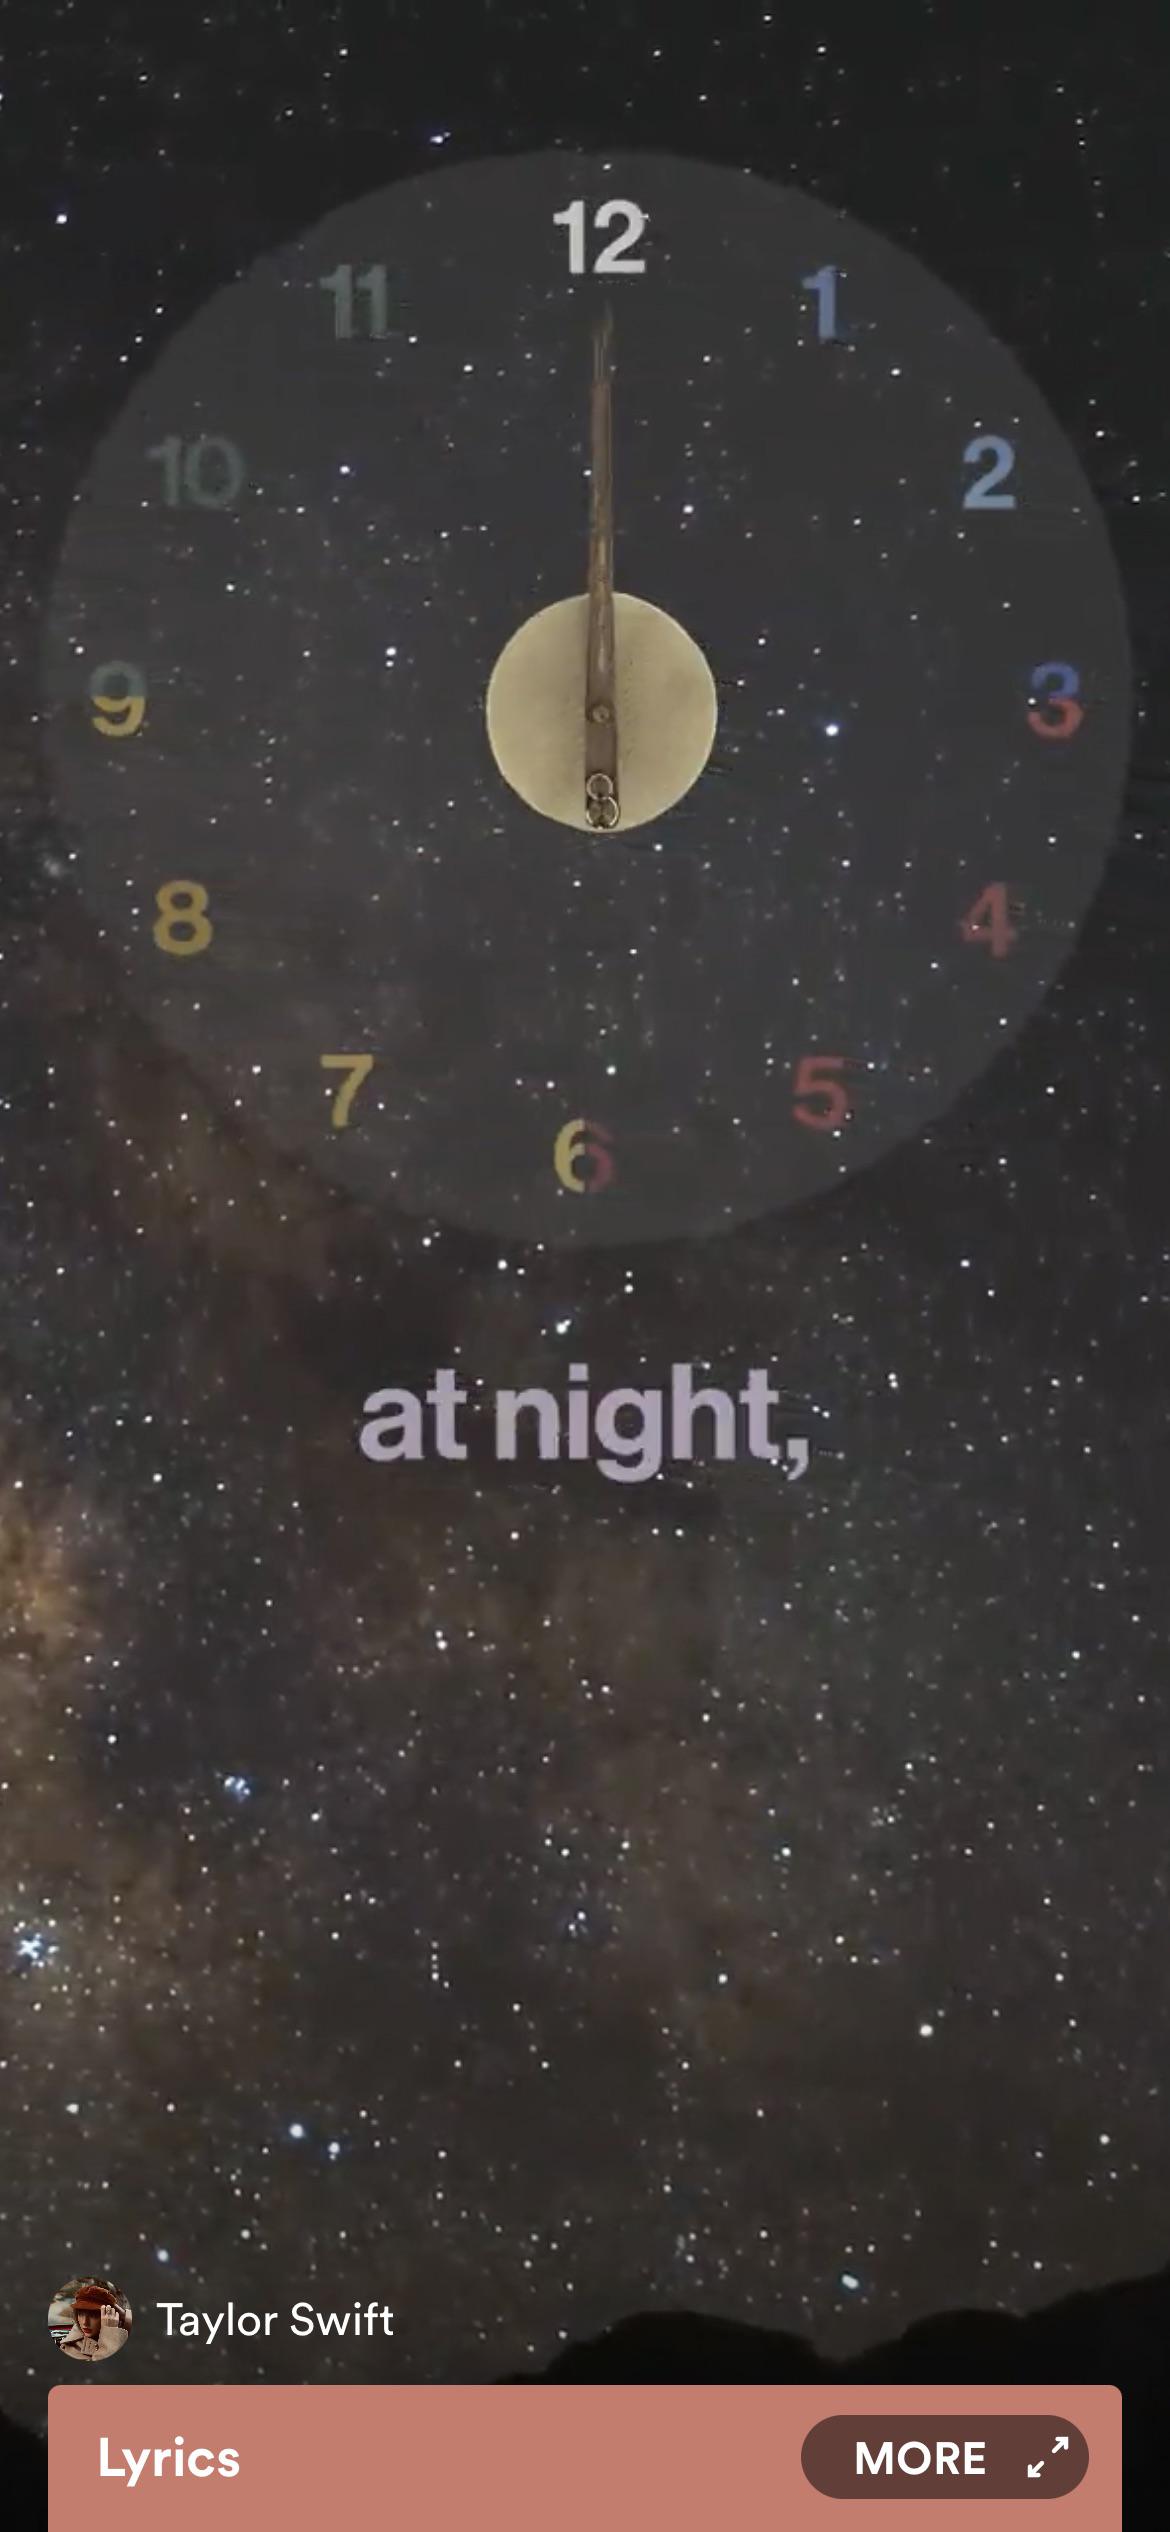 A clock with the time set to 12:34 is shown against a starry background. - Spotify